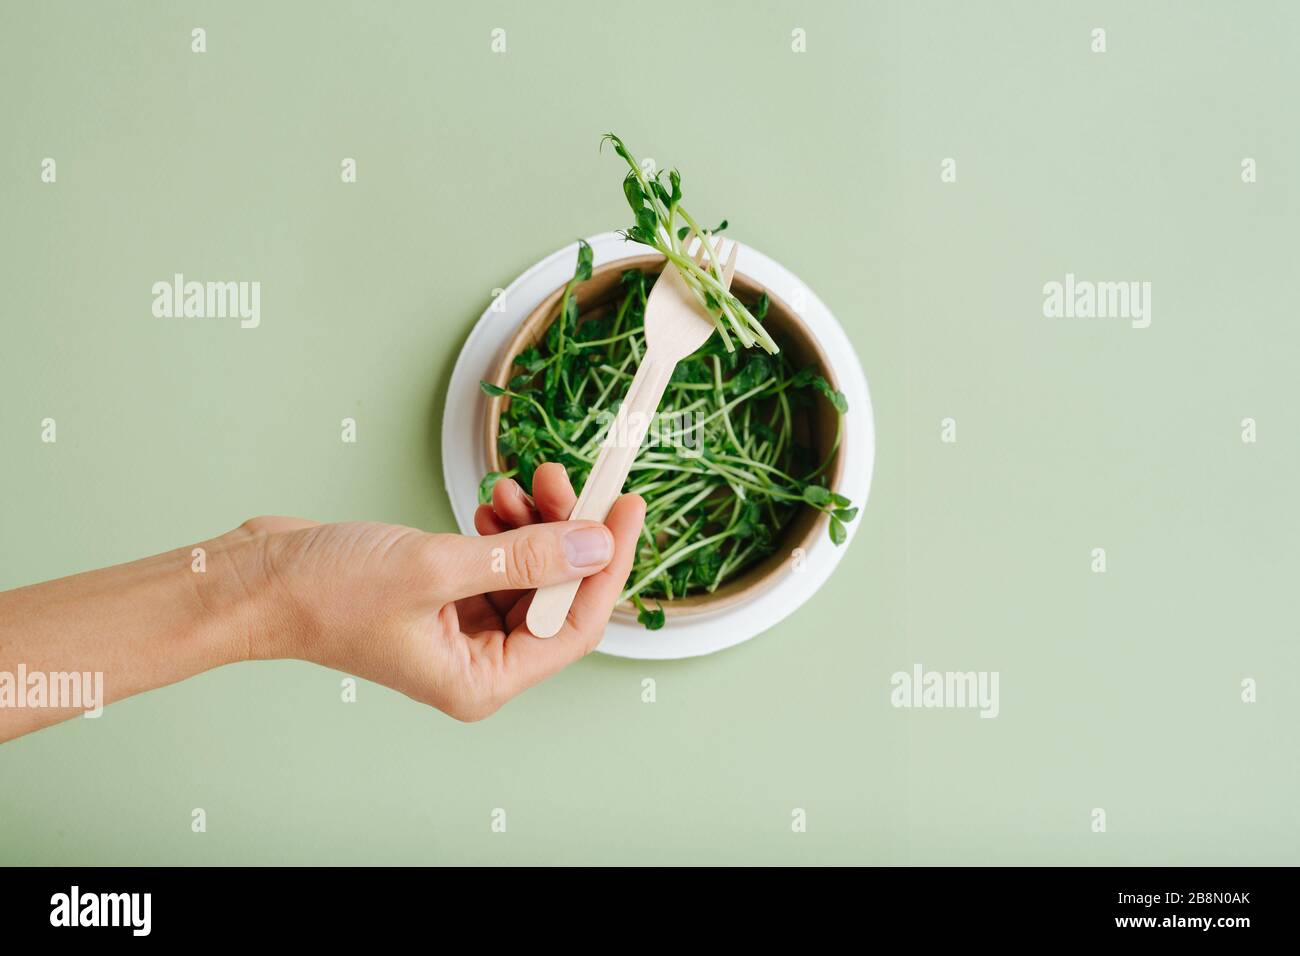 Hand with cornstarch fork, and eco-friendly disposable plate with peas Stock Photo